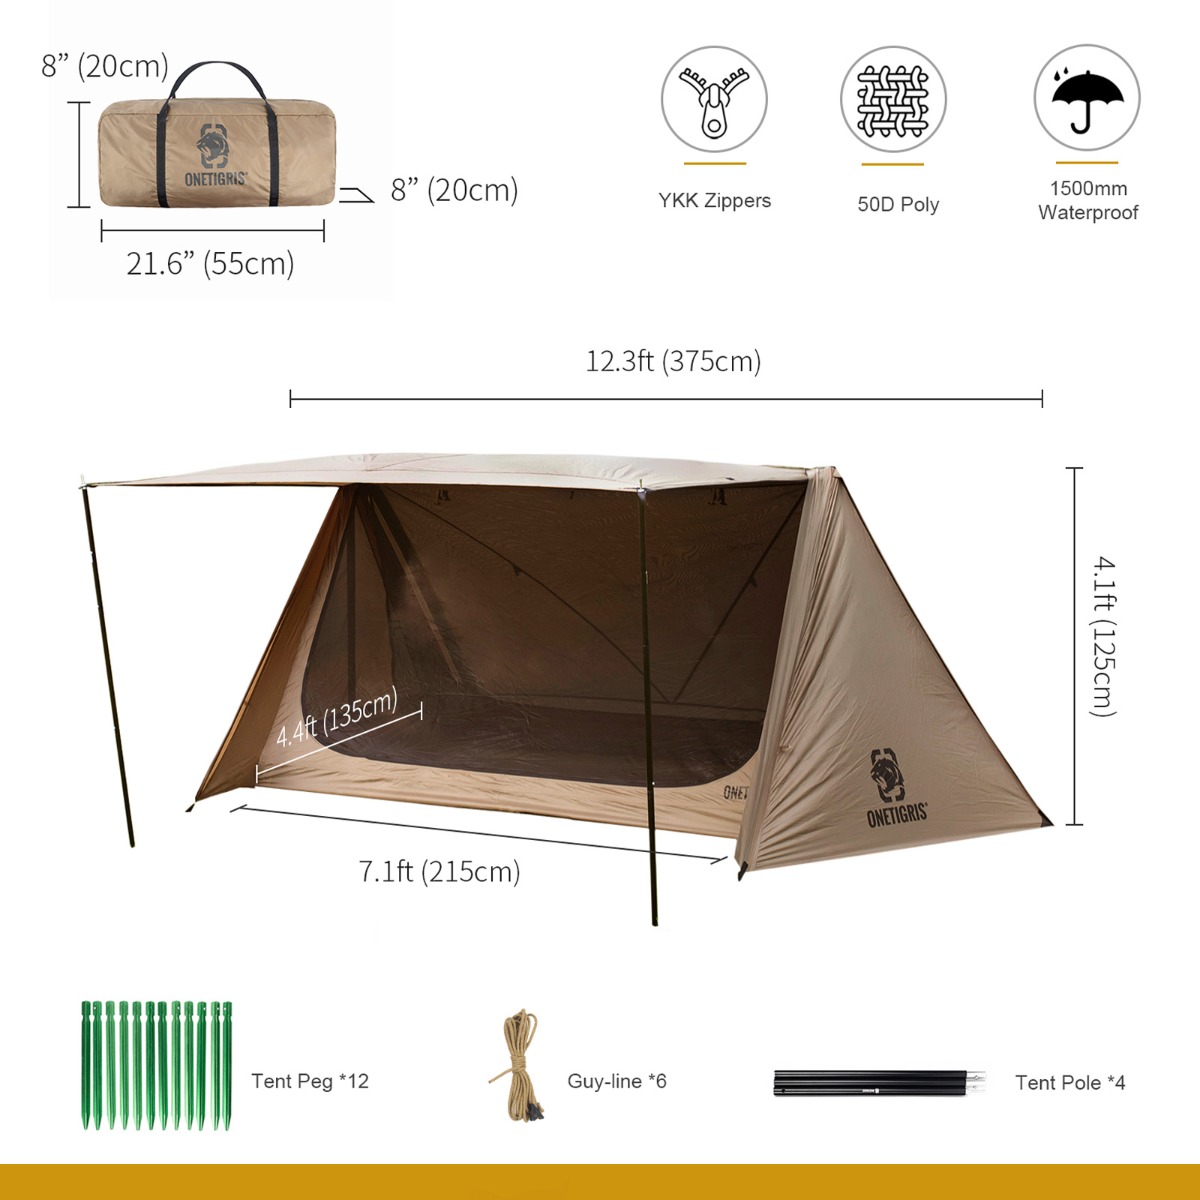 OneTigris 4-doored Double Shelter tent size chart